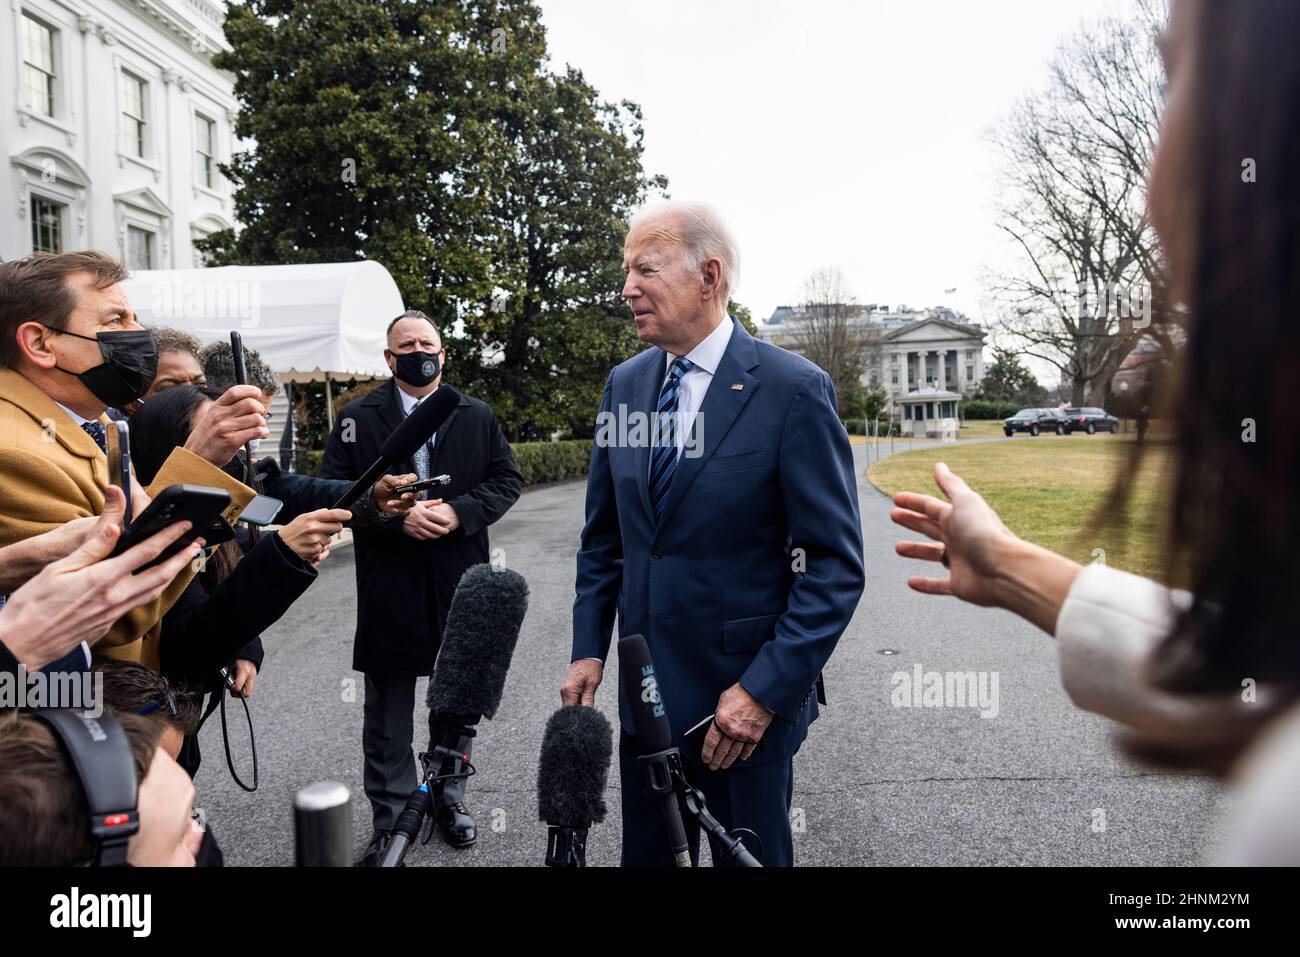 Washington, DC, USA. 17th Feb, 2022. United States President Joe Biden speaks to the media about Russias buildup on the Ukrainian border as he departs the White House for Cleveland in Washington, DC, USA, 17 February 2022. The president said there is a very high risk of a Russian invasion of Ukraine in several days. NATO and the Biden White House have dismissed Russian claims that they are drawing down troops on the Ukrainian border. Credit: Jim LoScalzo/Pool via CNP/dpa/Alamy Live News Stock Photo